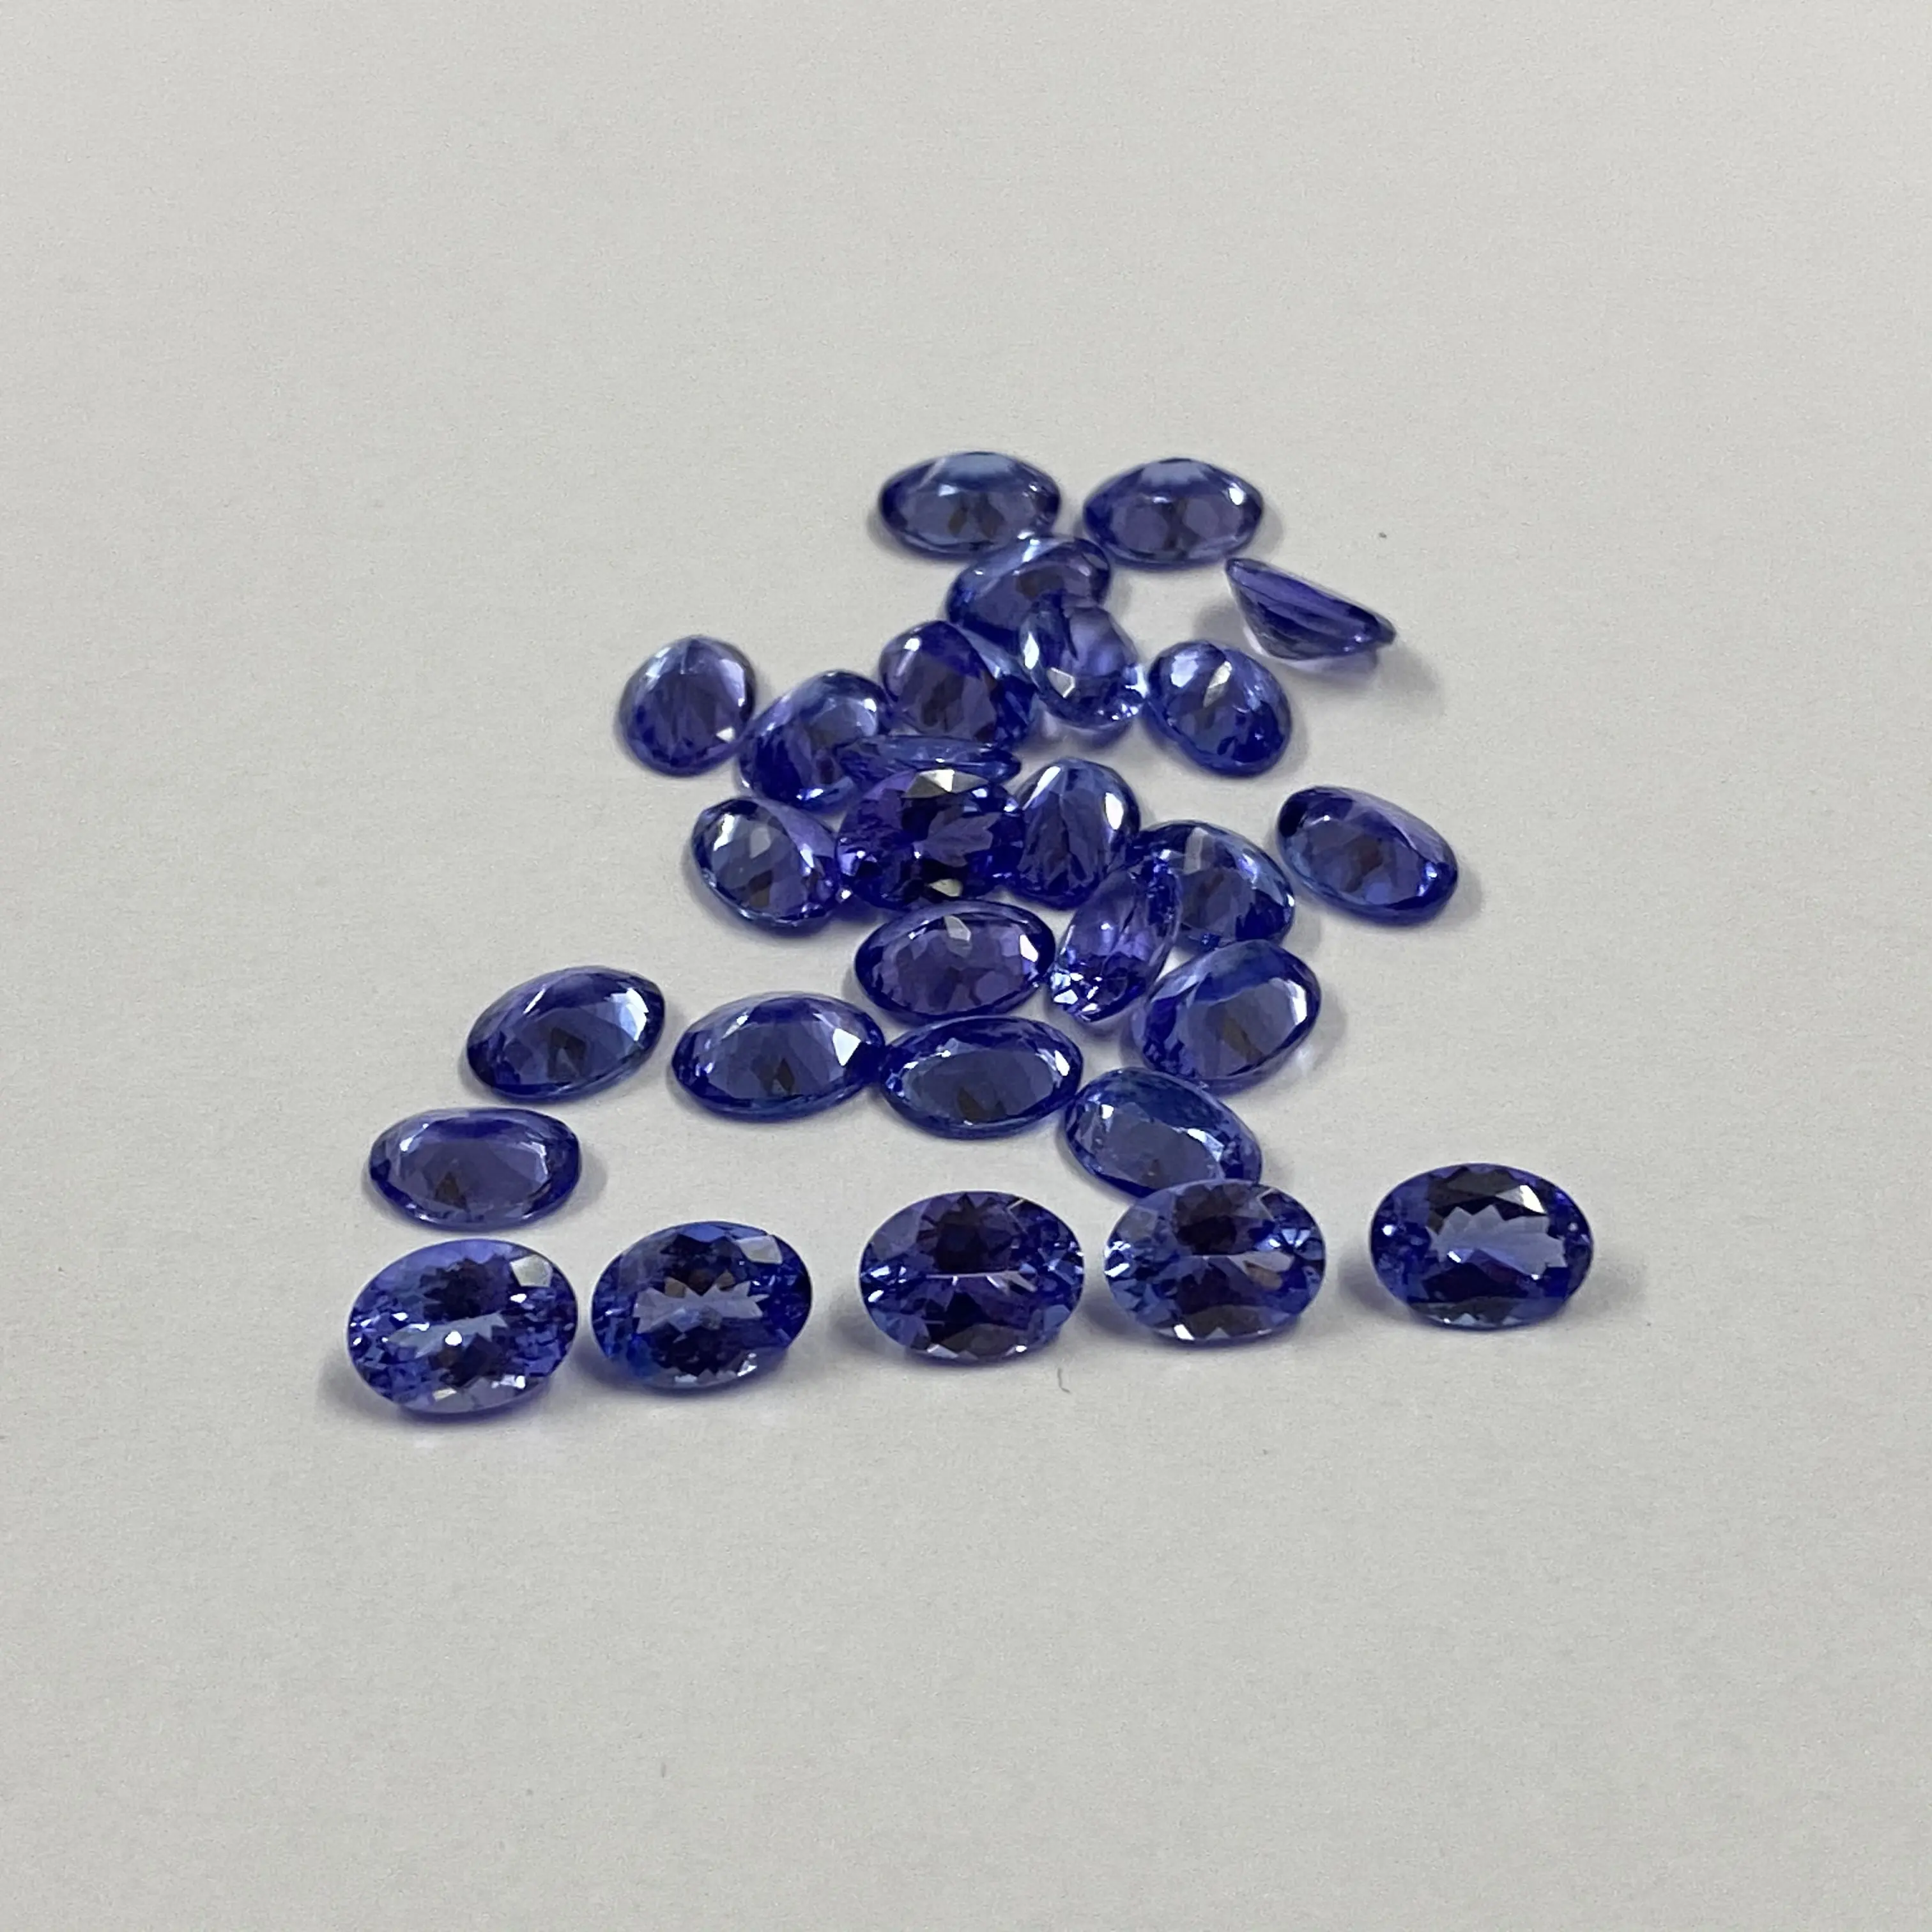 Topmost Quality Loose Oval Cut 100% Natural 3x4mm To 8x10mm Tanzanite Blue Color AAA++ Grade Loose Wholesale Gemstone Supplier